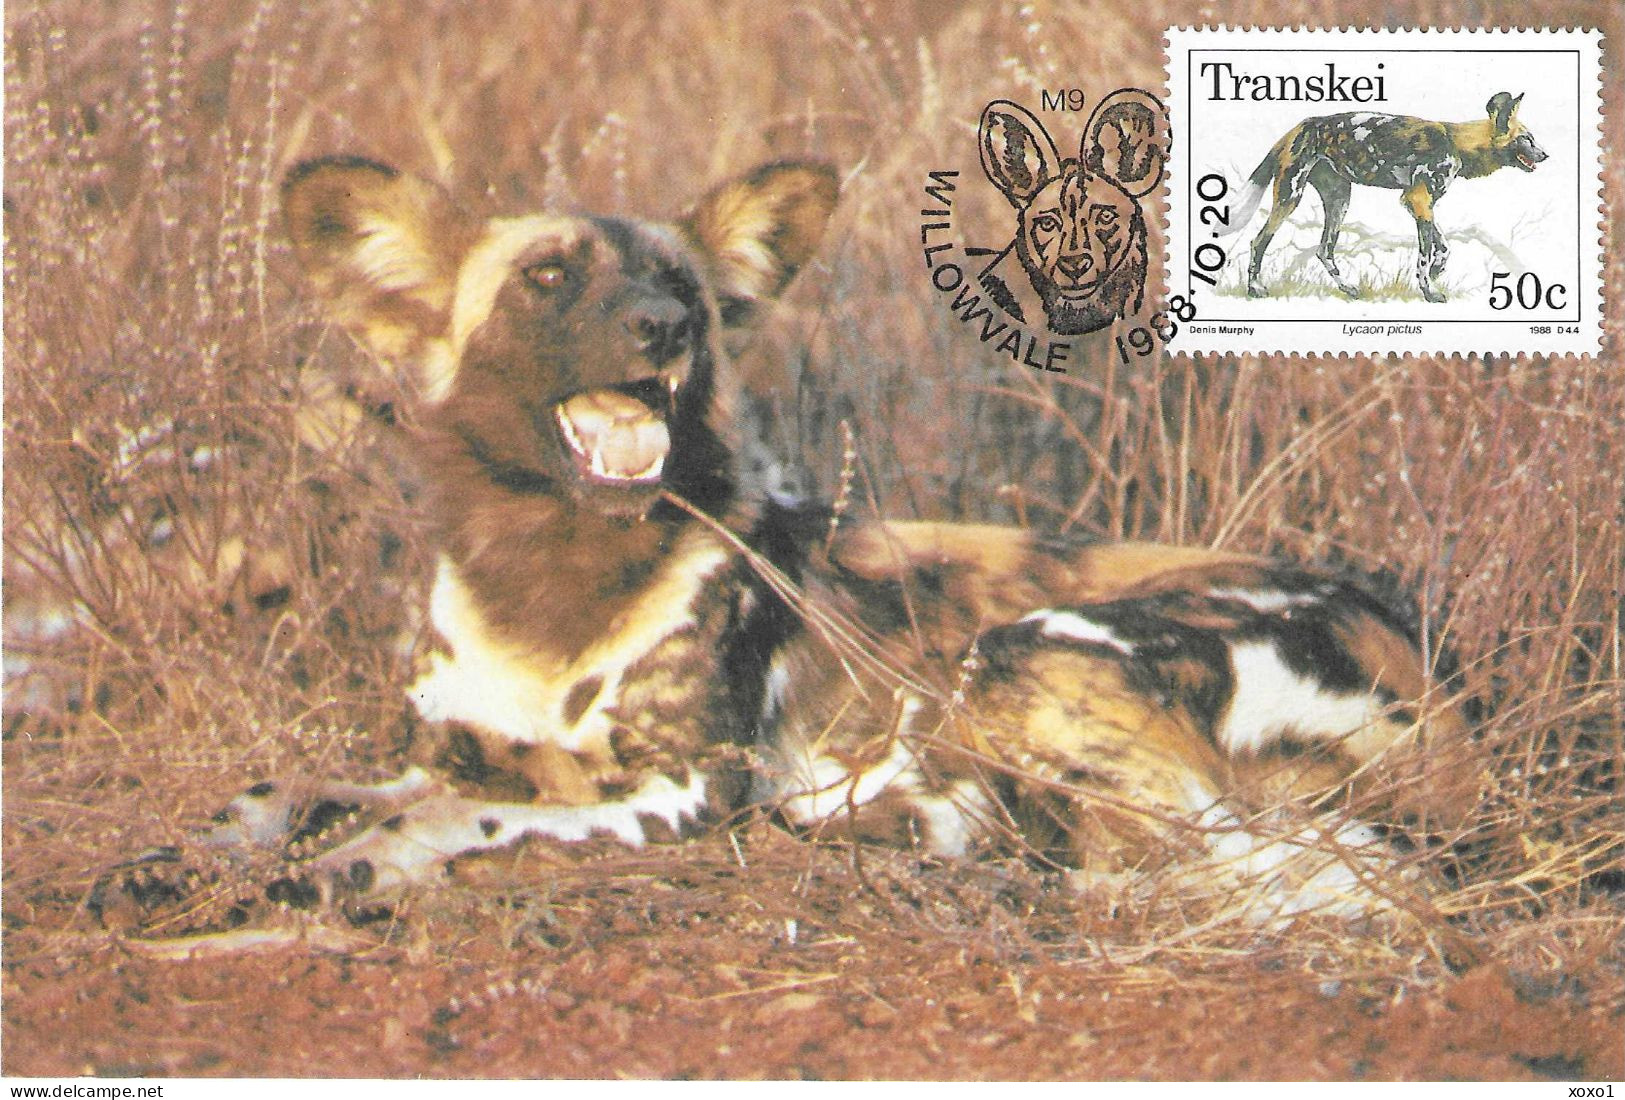 Transkei South Africa 1988 MiNr. 229  Animals  African Wild Dog (Lycaon Pictus) MC 1.80 € - Dogs